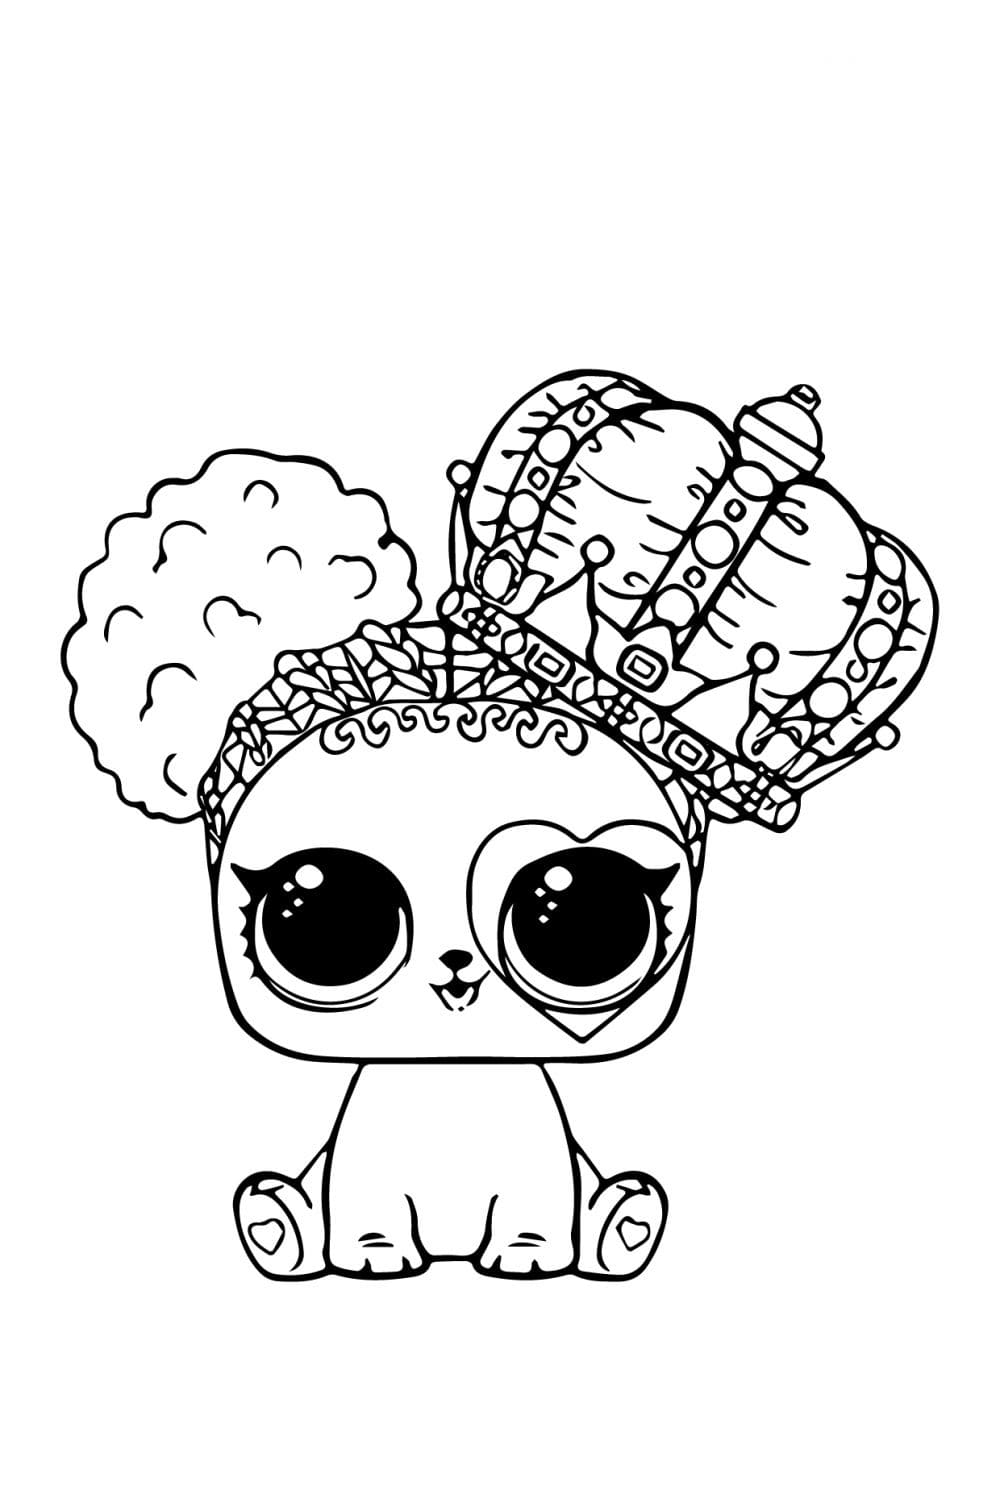 LOL Pets Coloring Pages   Free Printable Coloring Pages for Kids